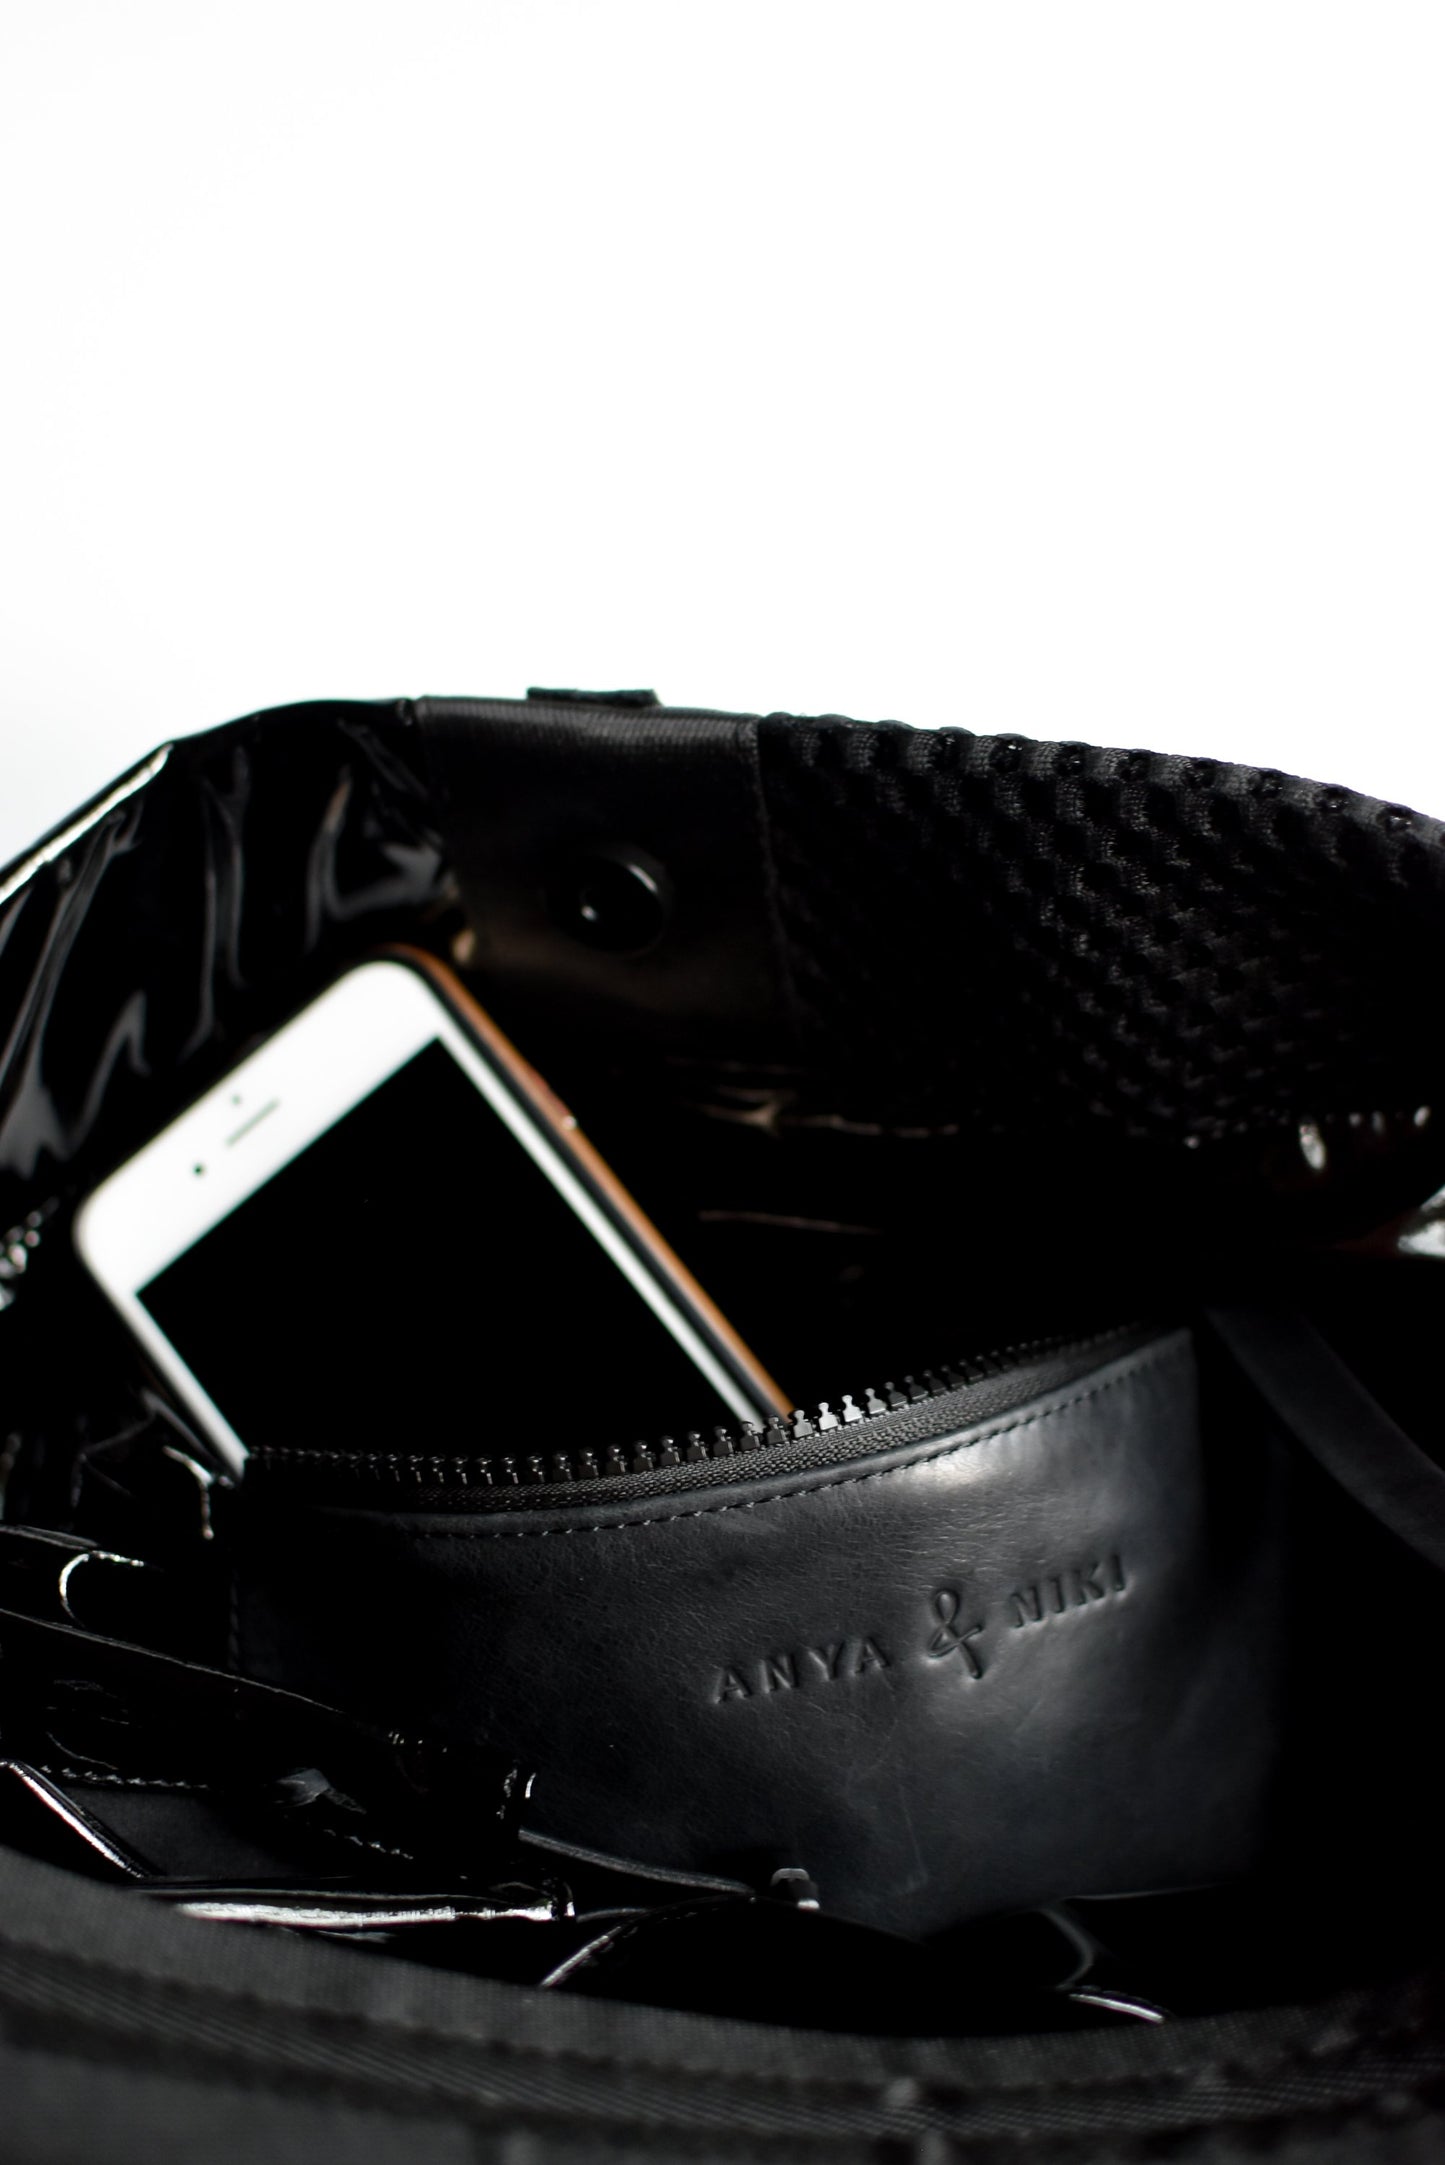 Close up of interior leather pocket on black sporty mesh and shiny vinyl tote bag.